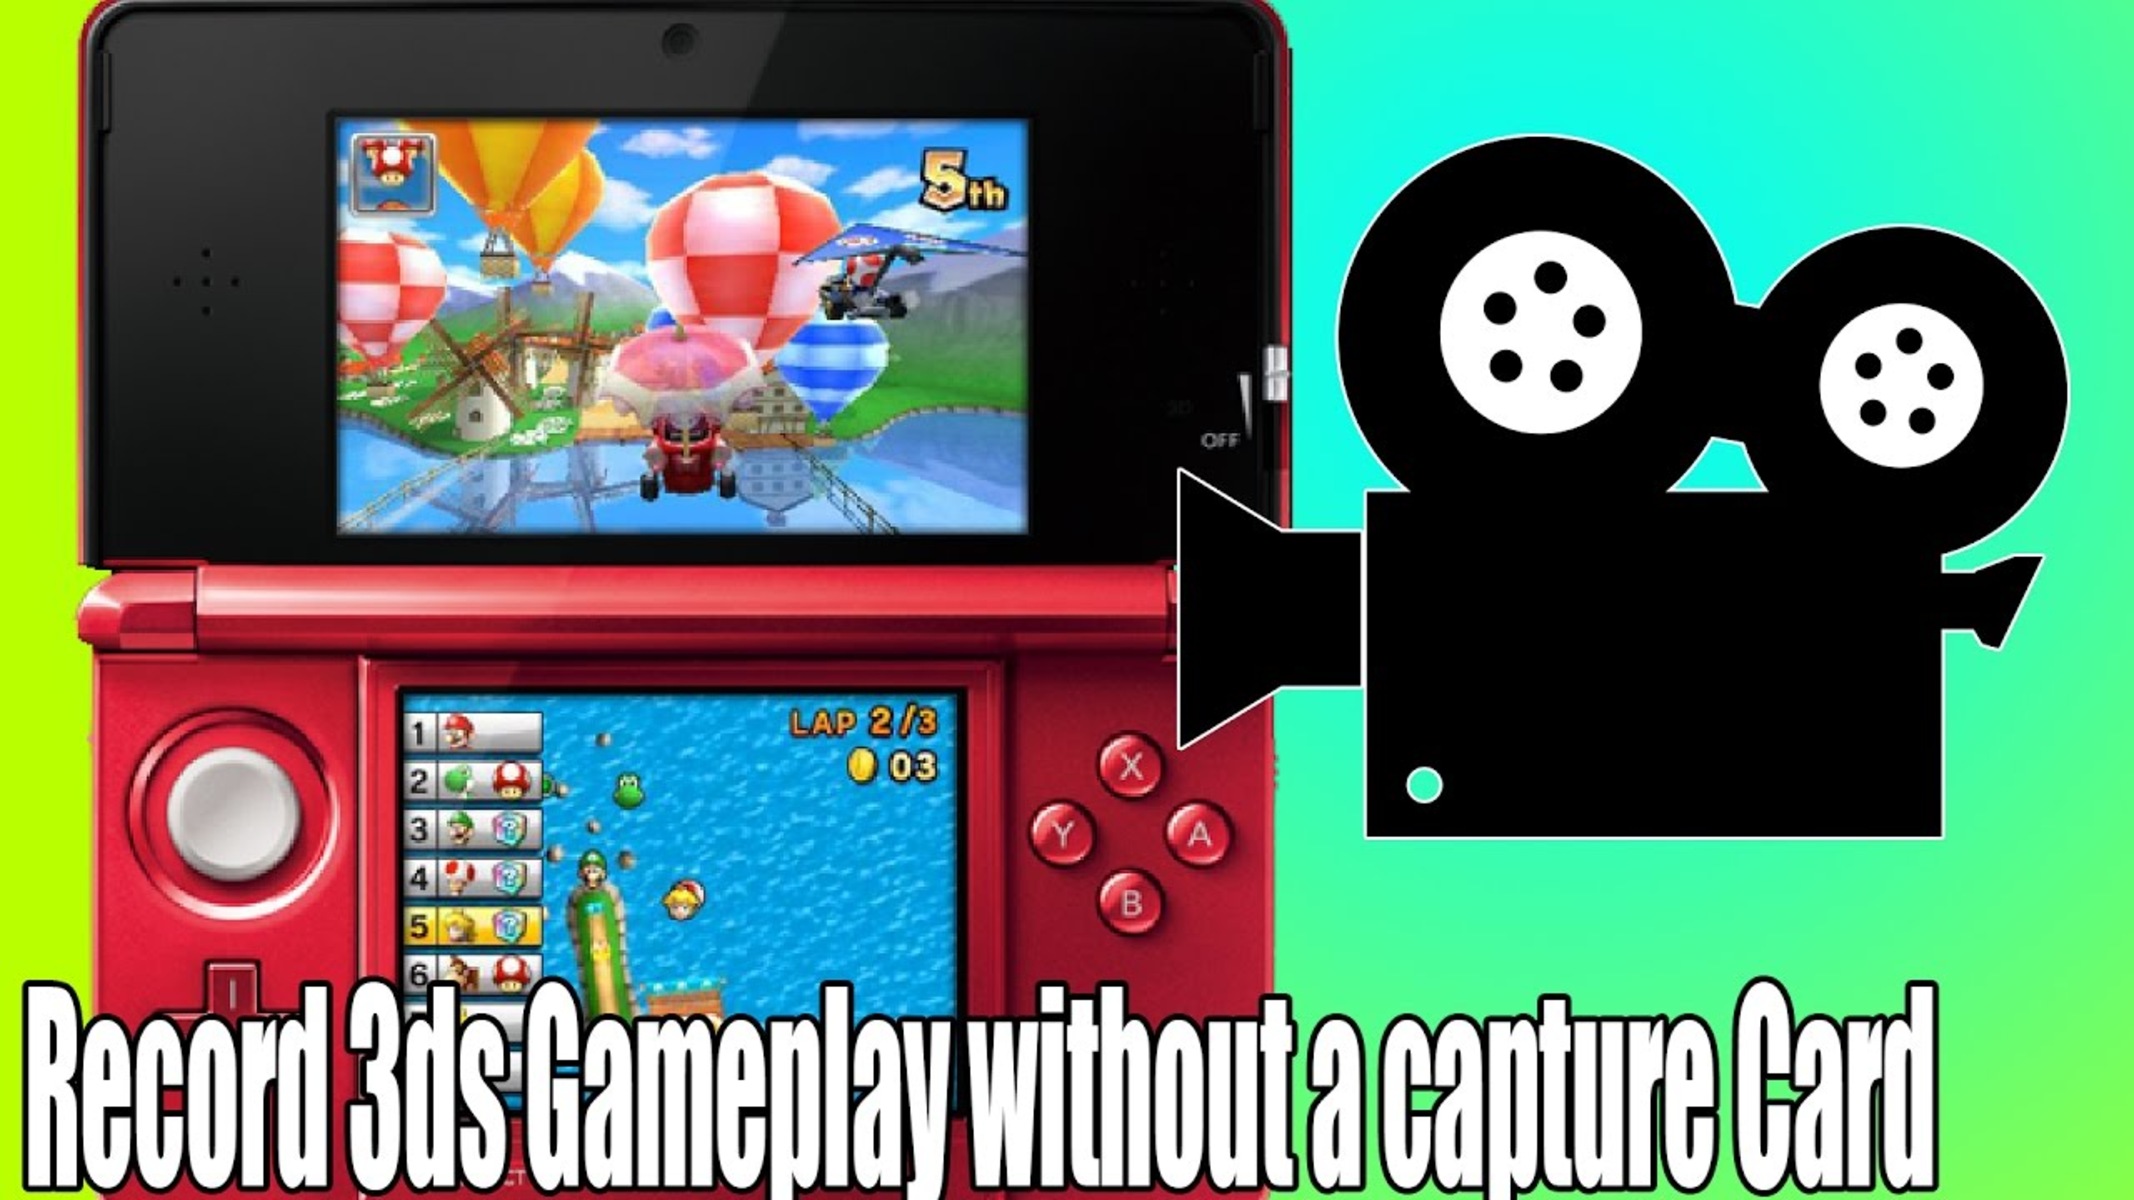 How To Record Your 3Ds Screen Without A Capture Card